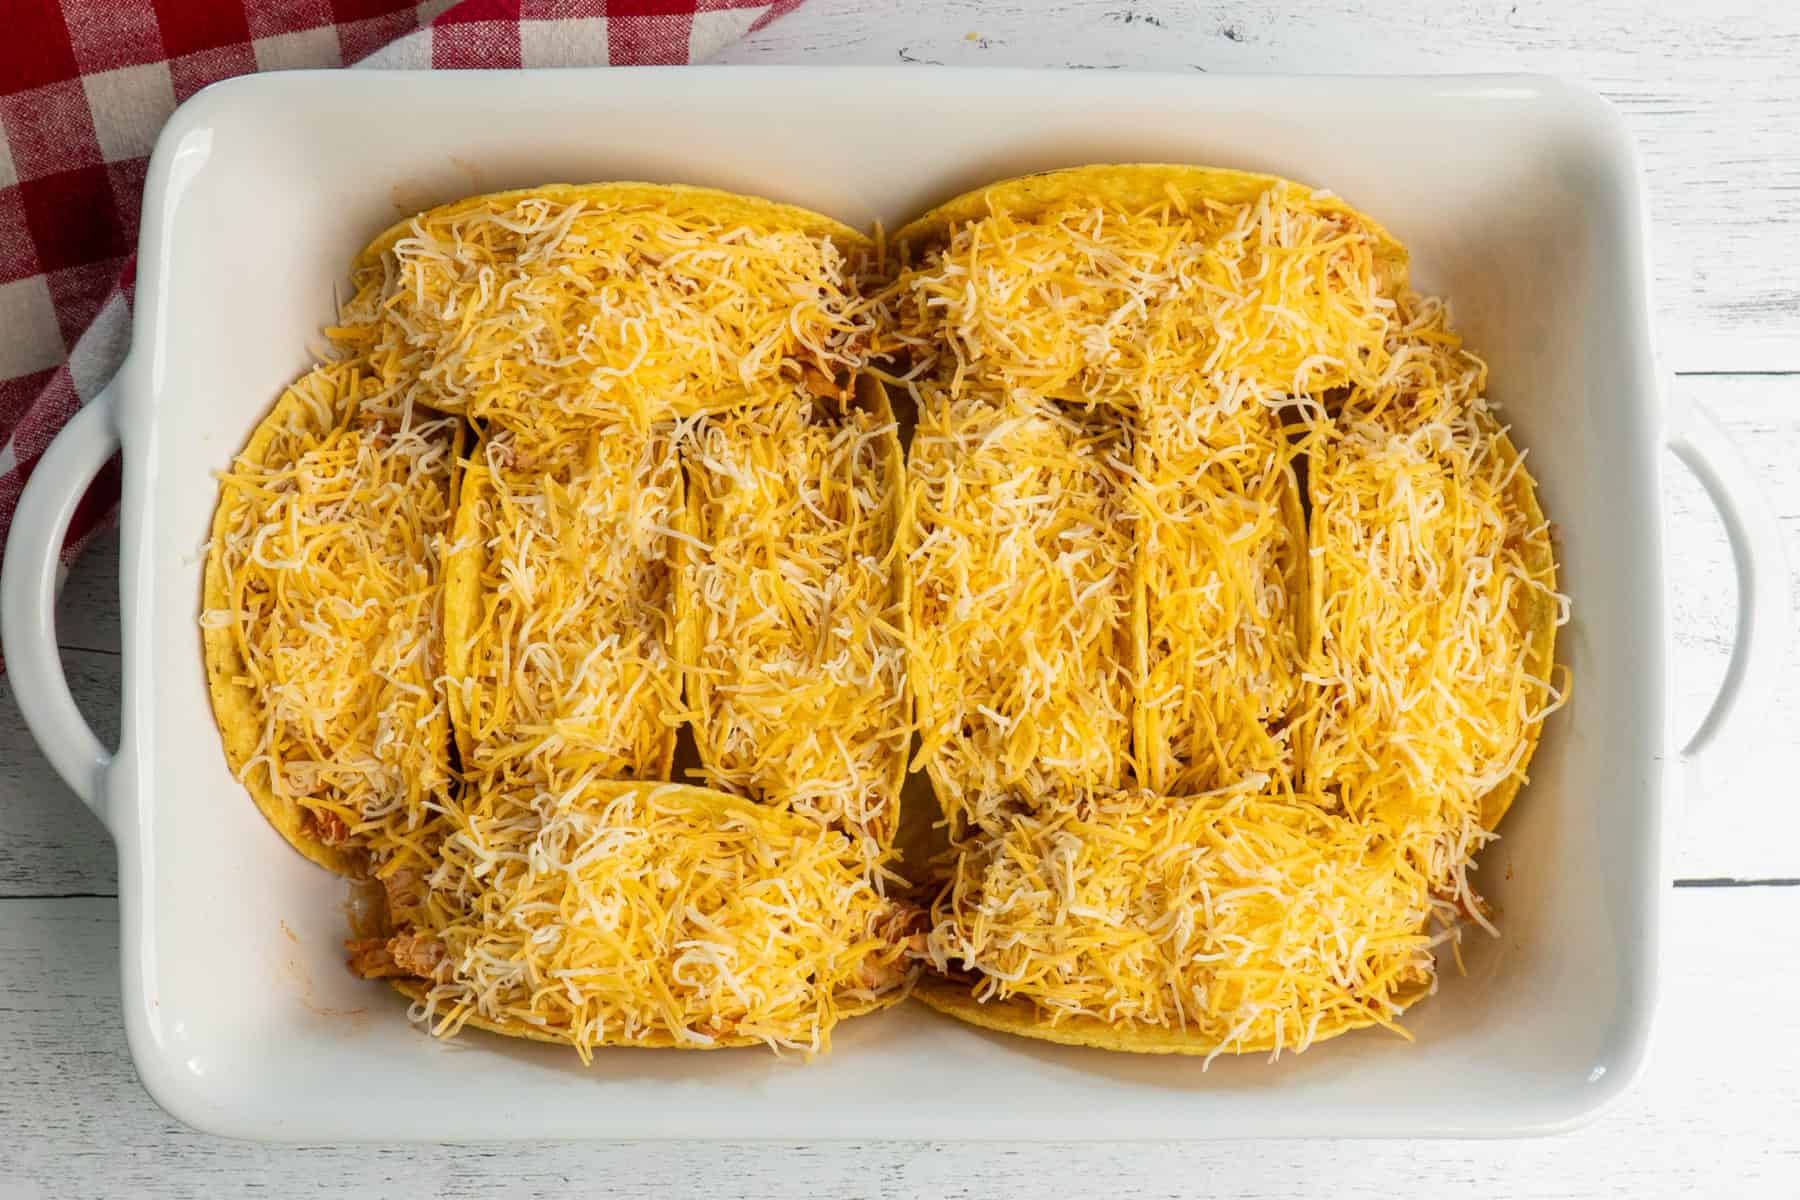 Tacos topped with shredded cheese.